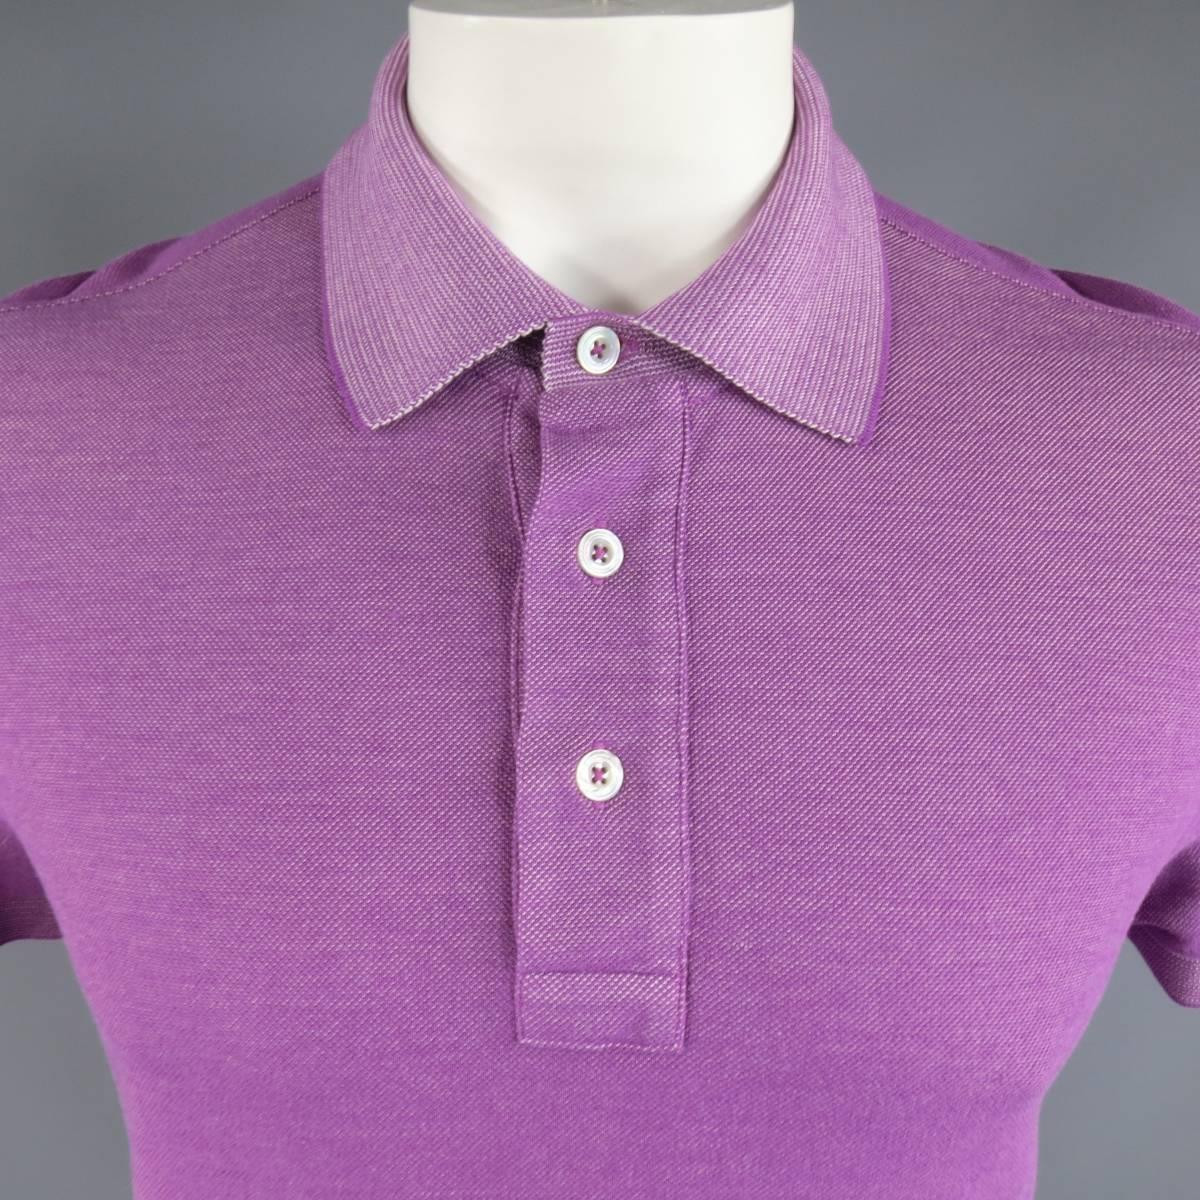 Classic TOM FORD polo in an orchid purple pique with pointed contrast collar and arm bands. Made in Italy.
Retails at $850.00.
 
Excellent Pre-Owned Condition.
Marked: IT 52
 
Measurements:
 
Shoulder: 18 in.
Chest: 43 in.
Sleeve: 8.5 in.
Length: 28